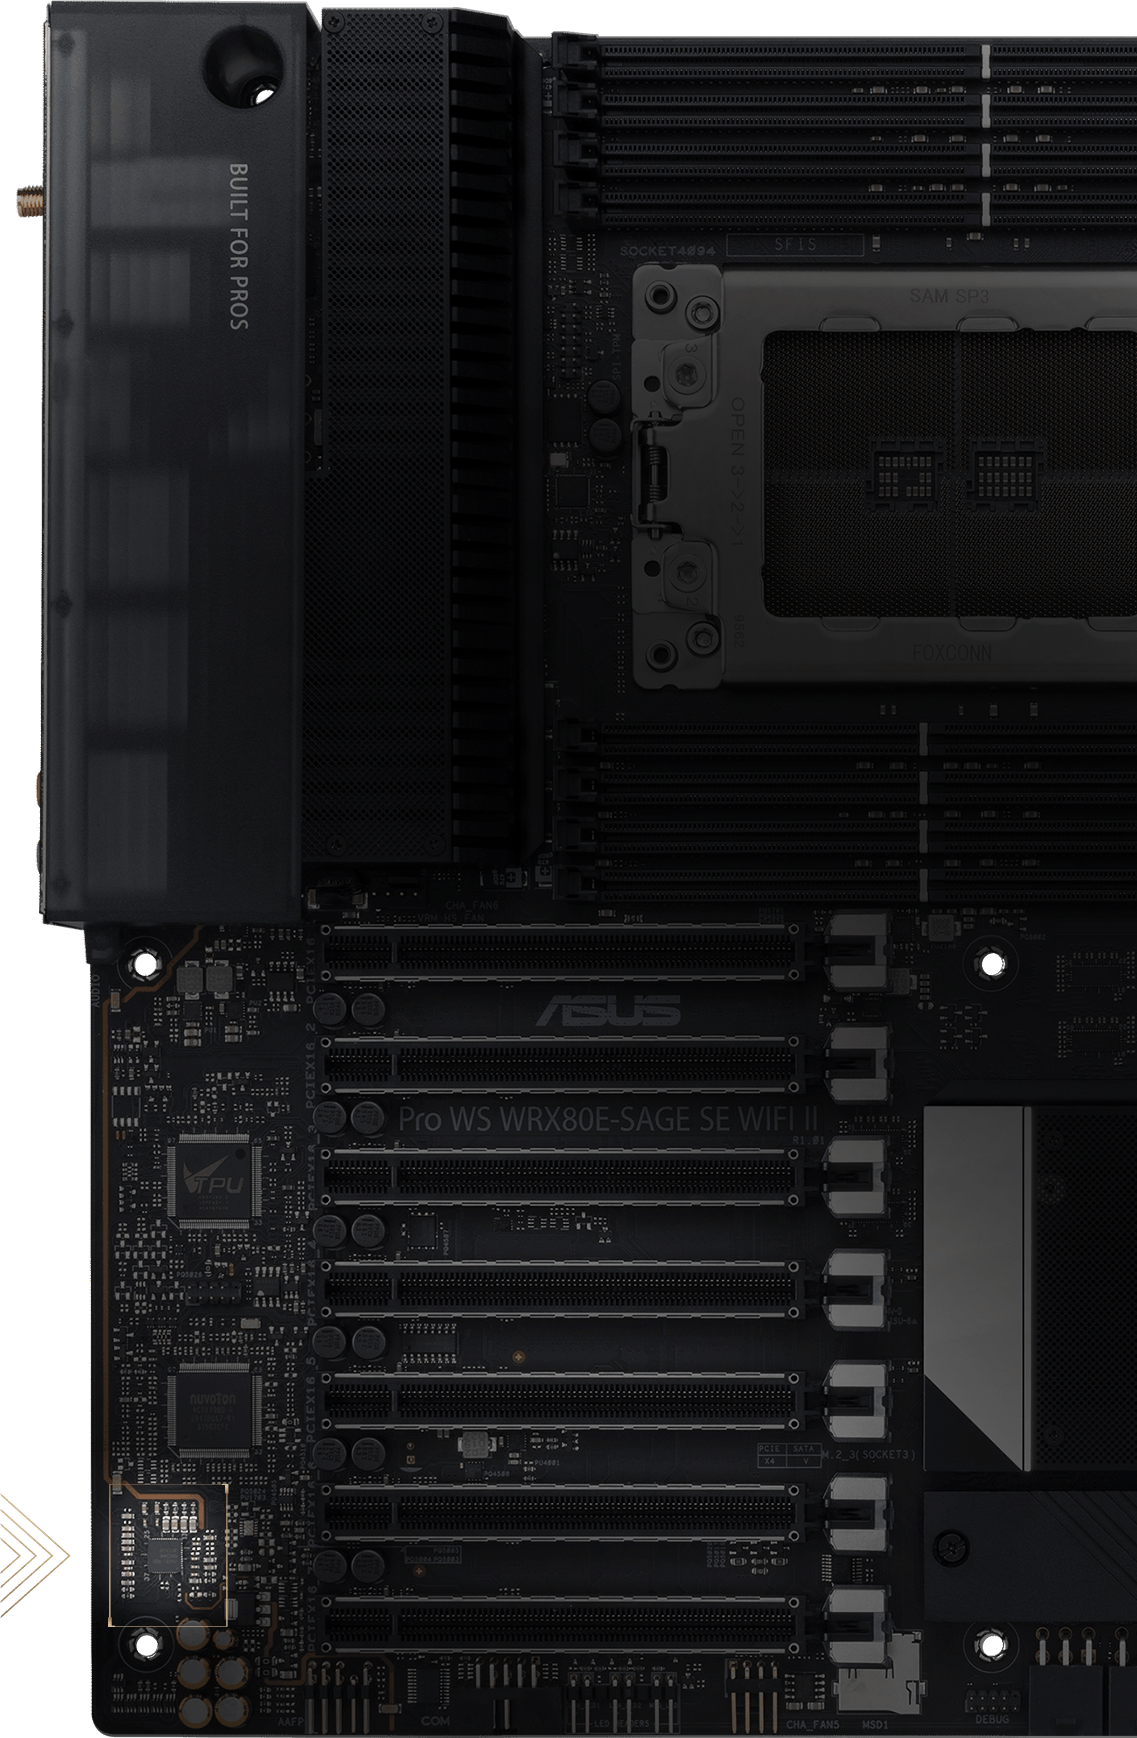 Motherboard front overview